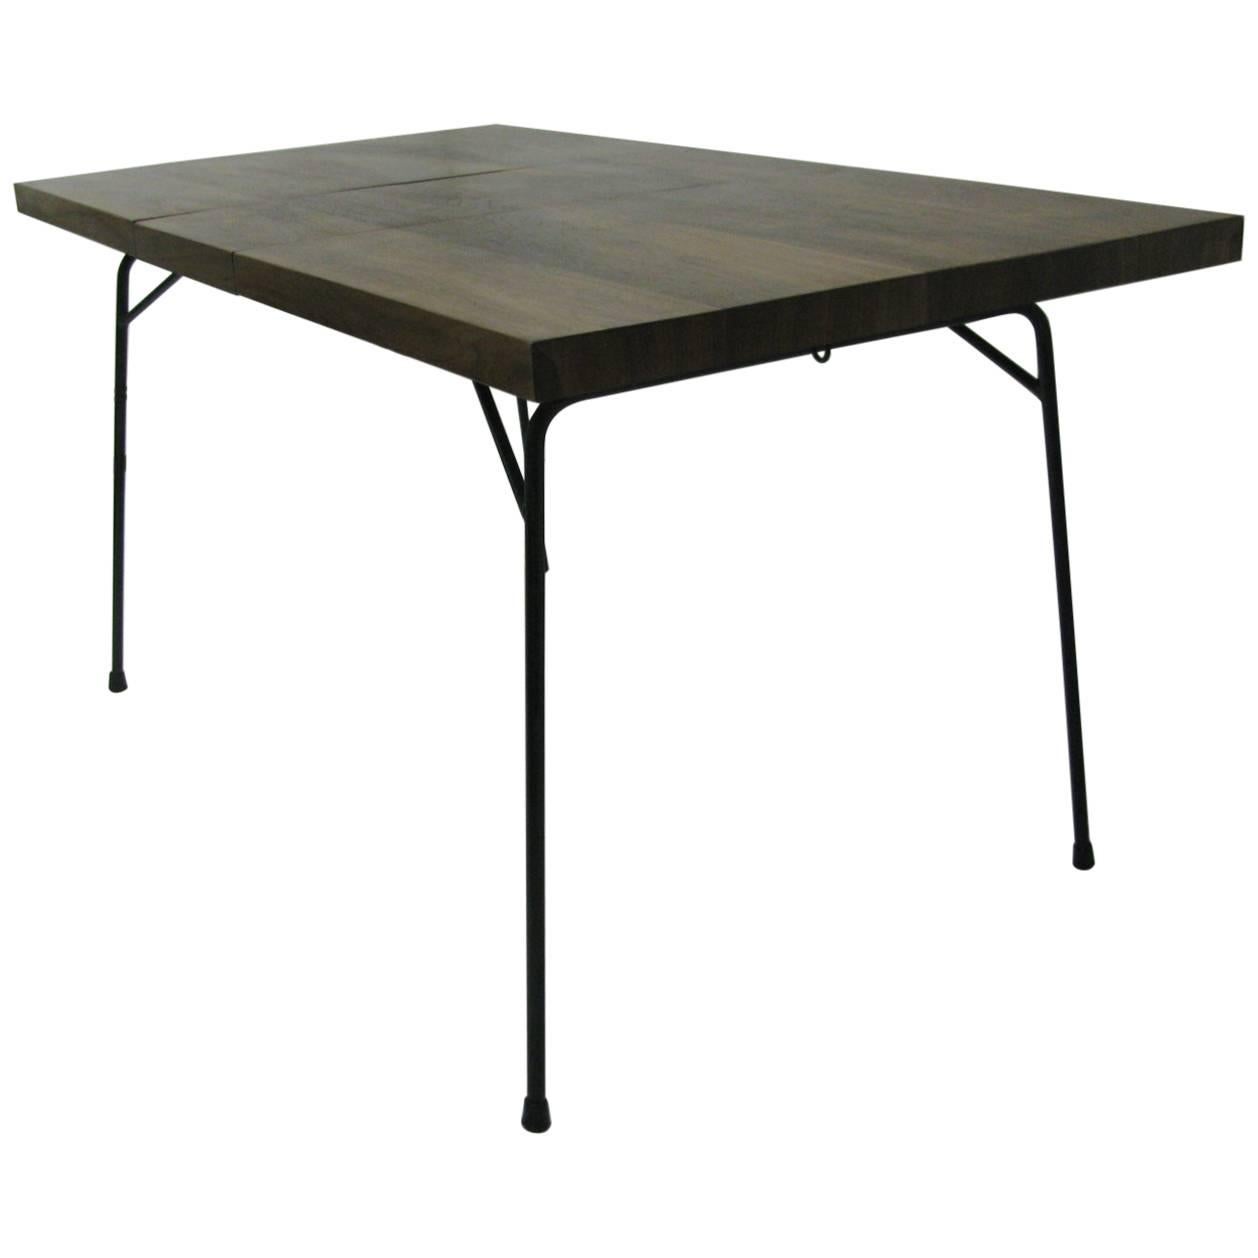 American Mid-Century Modern Black Walnut and Iron Dining Table by Clifford Pascoe For Sale